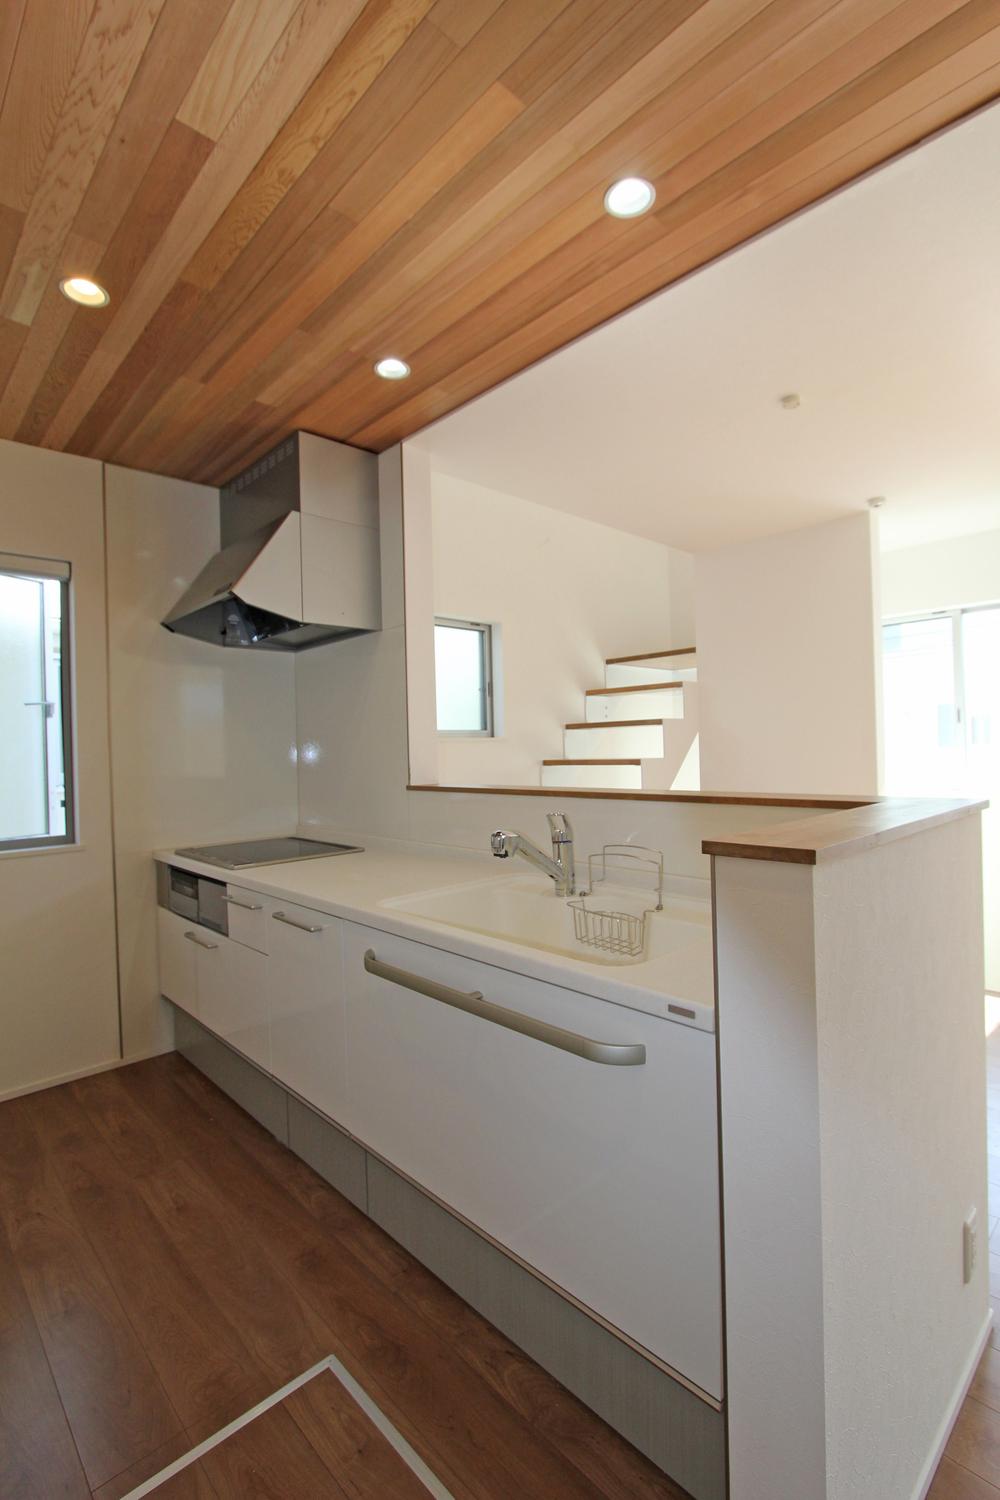 Same specifications photo (kitchen). Same house builders construction results